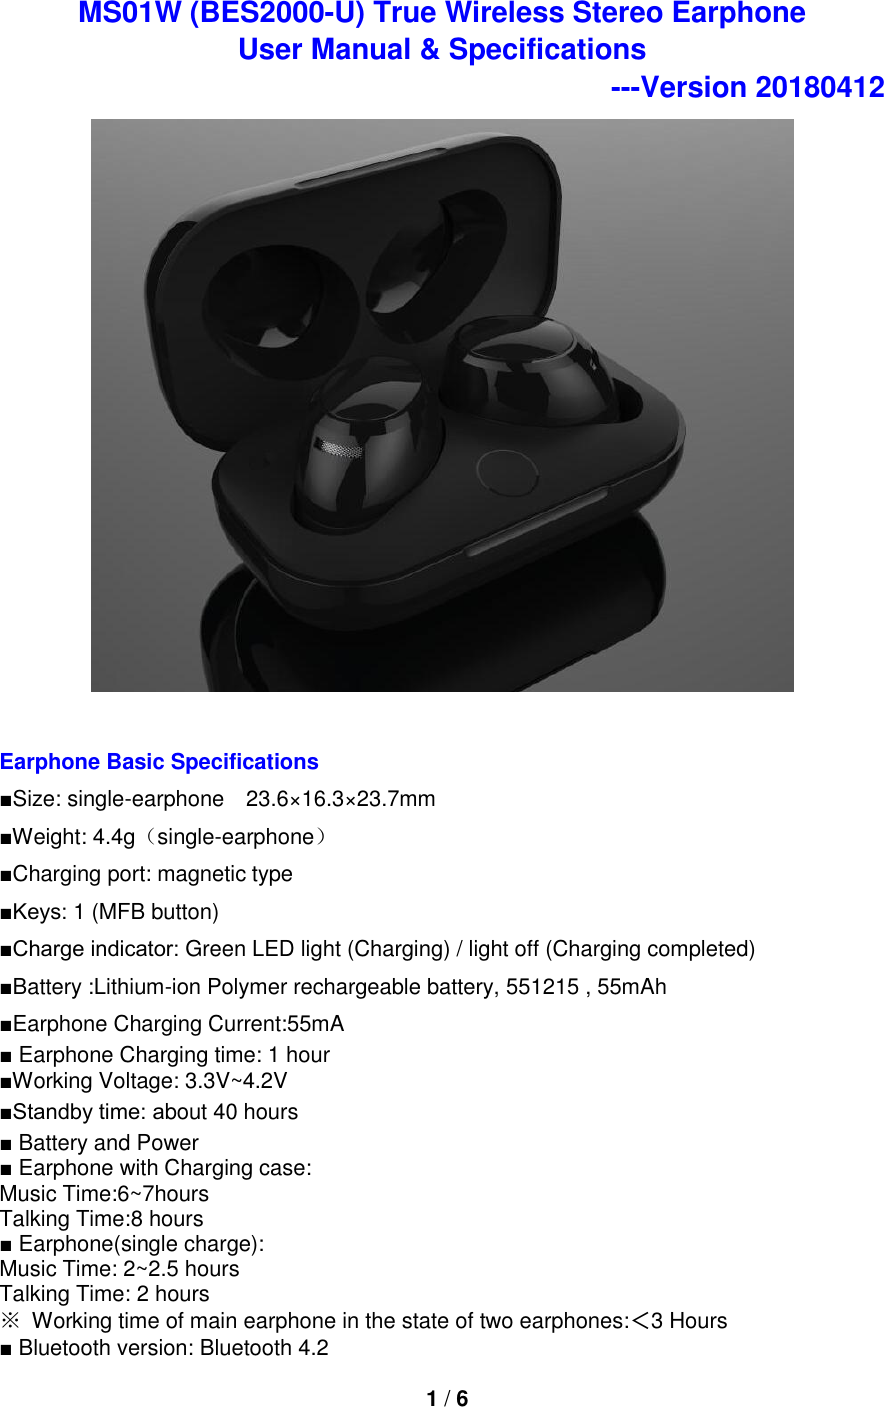  1 / 6  MS01W (BES2000-U) True Wireless Stereo Earphone   User Manual &amp; Specifications   ---Version 20180412   Earphone Basic Specifications ■Size: single-earphone  23.6×16.3×23.7mm ■Weight: 4.4g（single-earphone） ■Charging port: magnetic type   ■Keys: 1 (MFB button) ■Charge indicator: Green LED light (Charging) / light off (Charging completed) ■Battery :Lithium-ion Polymer rechargeable battery, 551215 , 55mAh ■Earphone Charging Current:55mA ■ Earphone Charging time: 1 hour ■Working Voltage: 3.3V~4.2V ■Standby time: about 40 hours ■ Battery and Power ■ Earphone with Charging case:   Music Time:6~7hours Talking Time:8 hours   ■ Earphone(single charge):   Music Time: 2~2.5 hours   Talking Time: 2 hours ※ Working time of main earphone in the state of two earphones:＜3 Hours ■ Bluetooth version: Bluetooth 4.2 